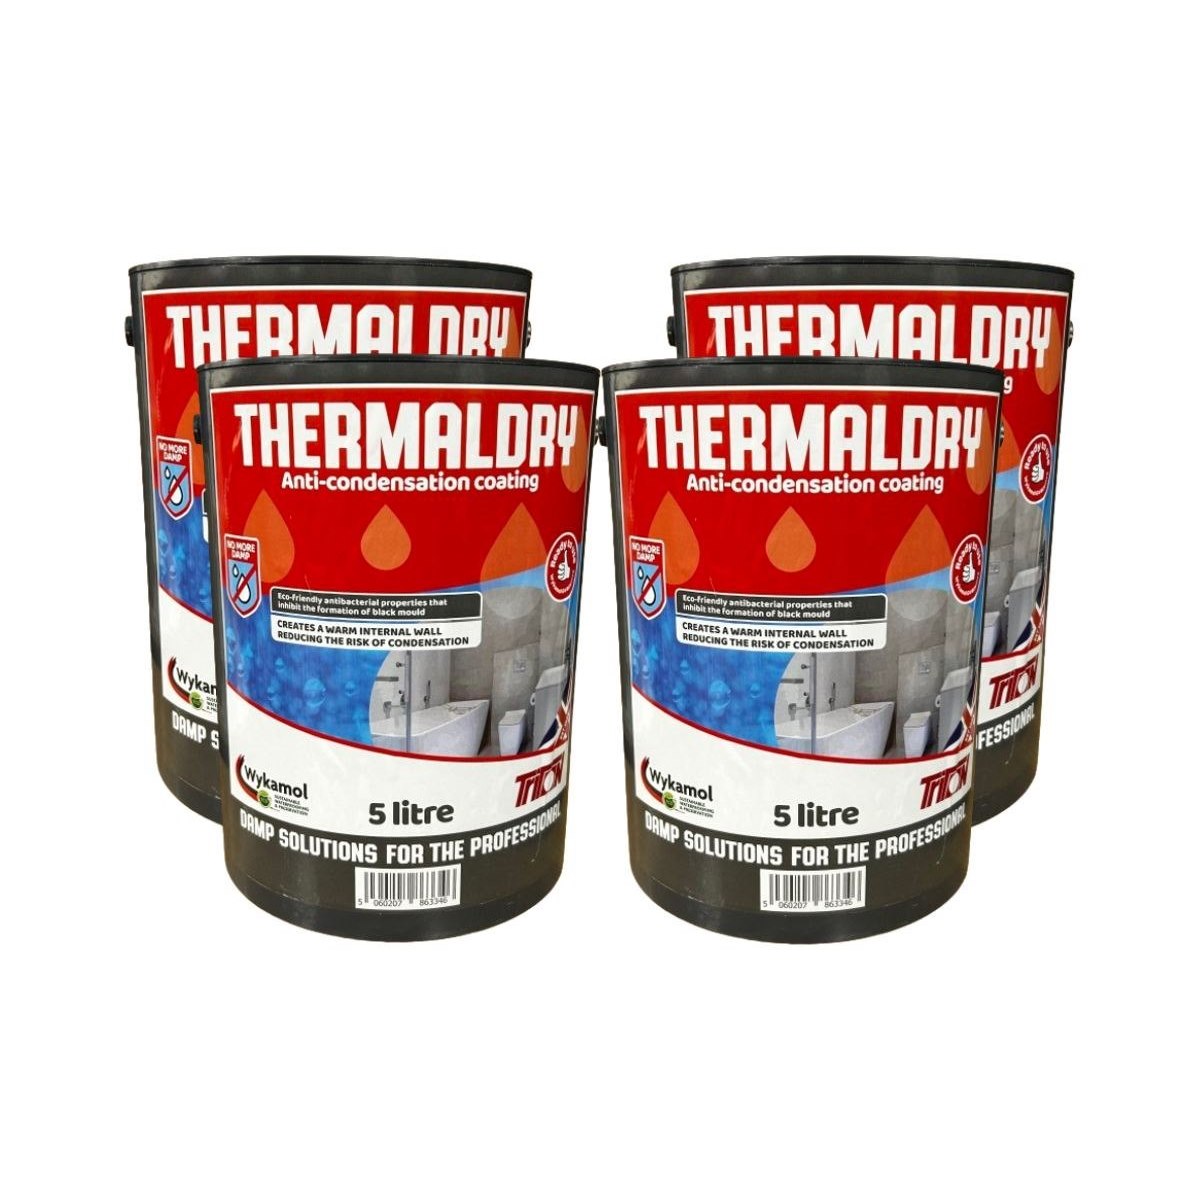 4 x Thermal Dry Anti Condensation Coating 5L